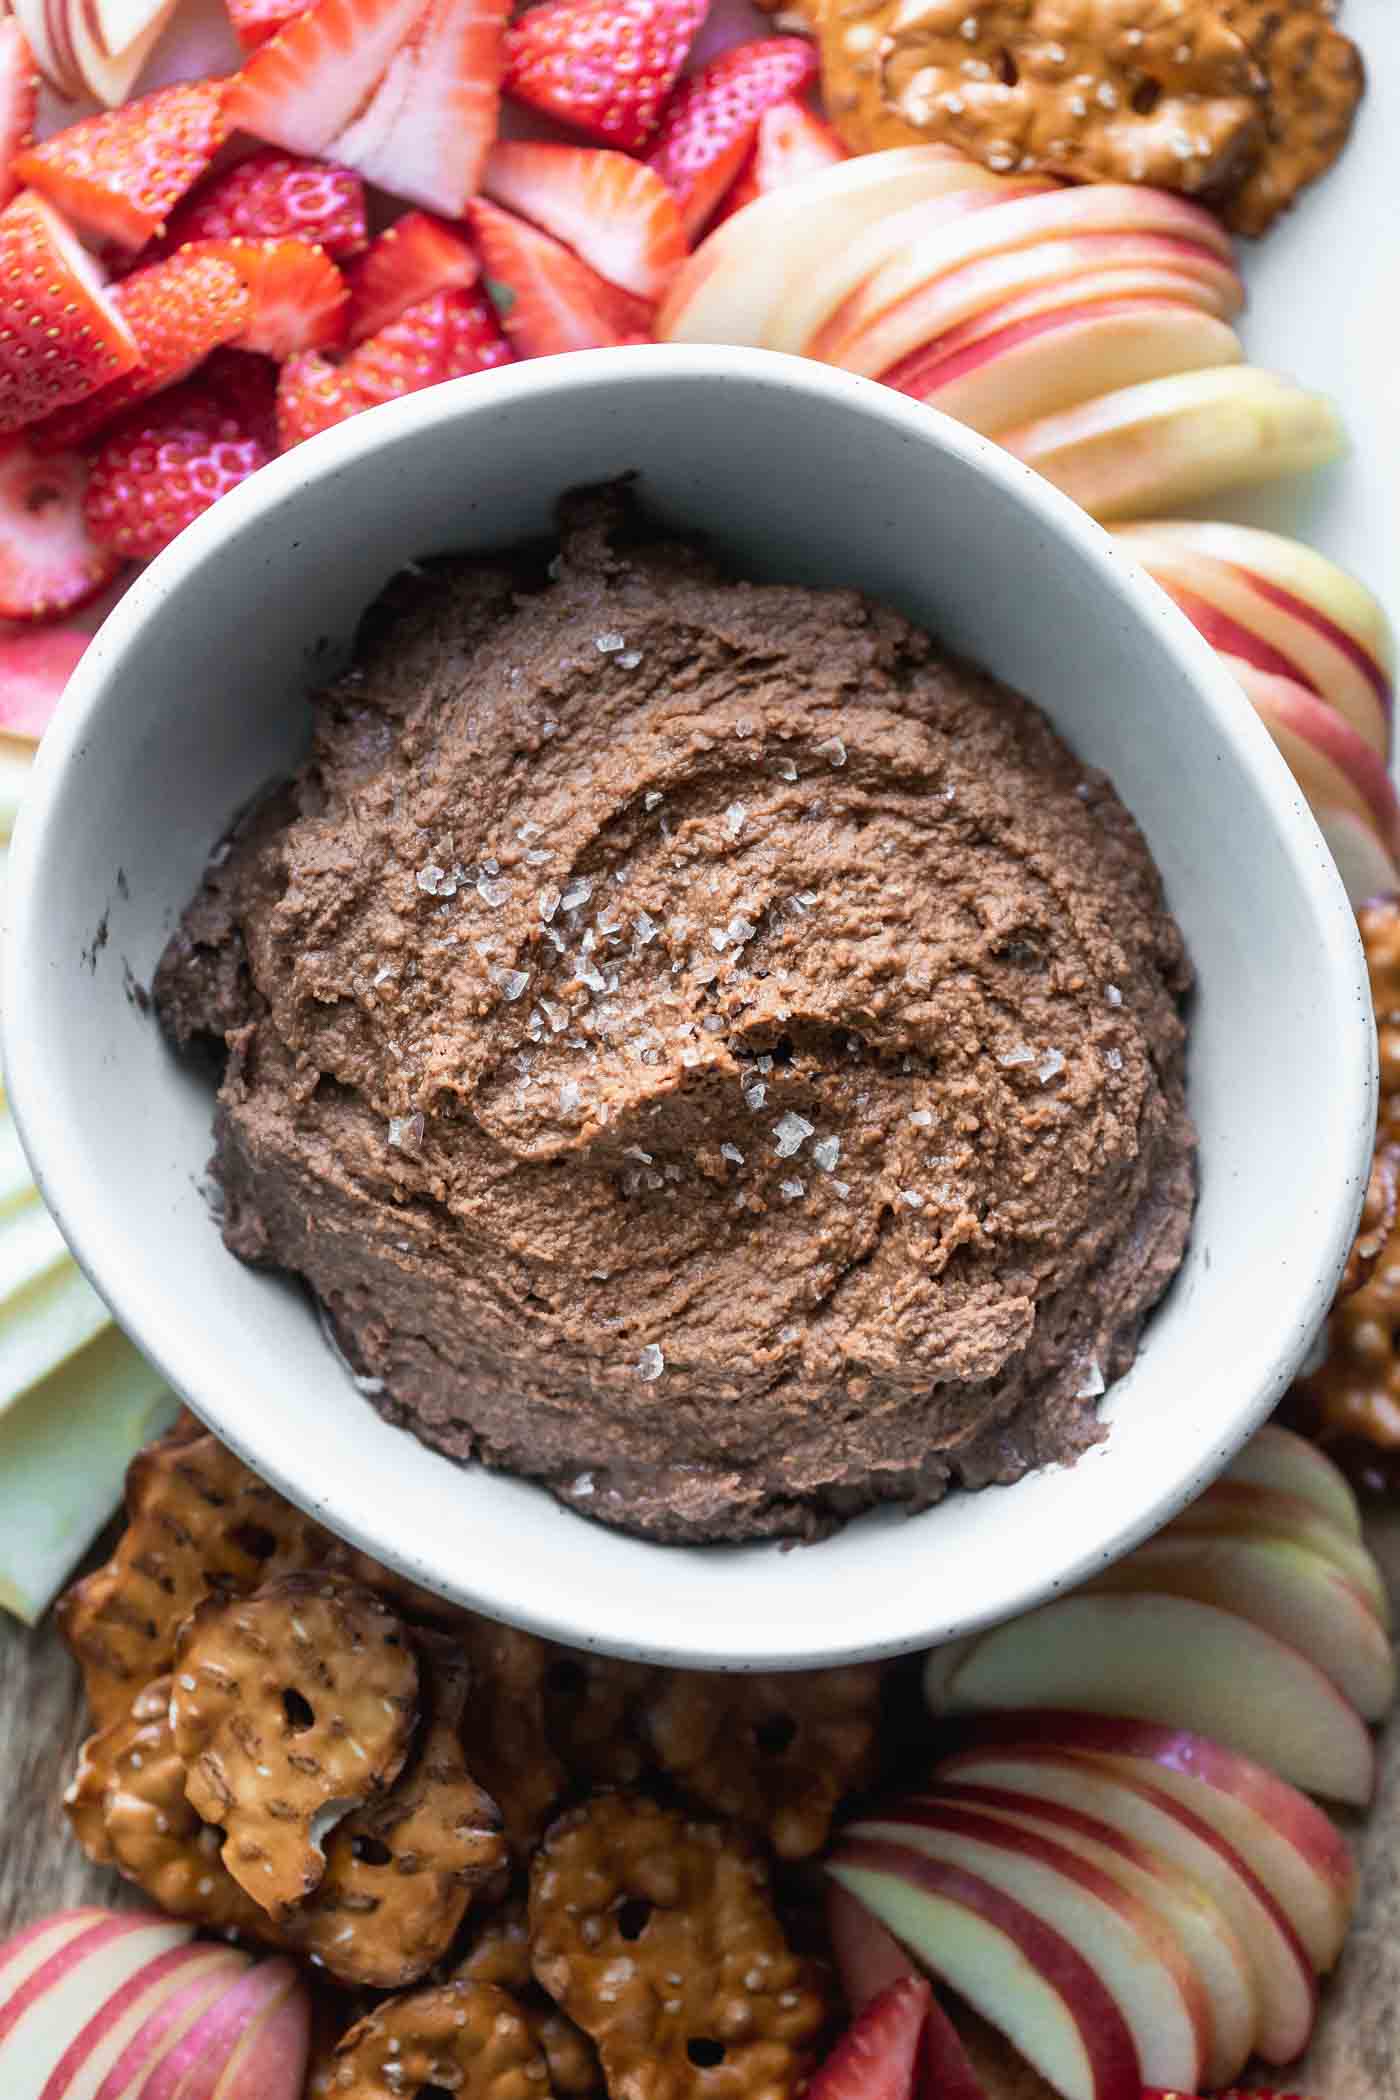 Chocolate Hummus: An easy, healthy way to get your chocolate fix without all the guilt!